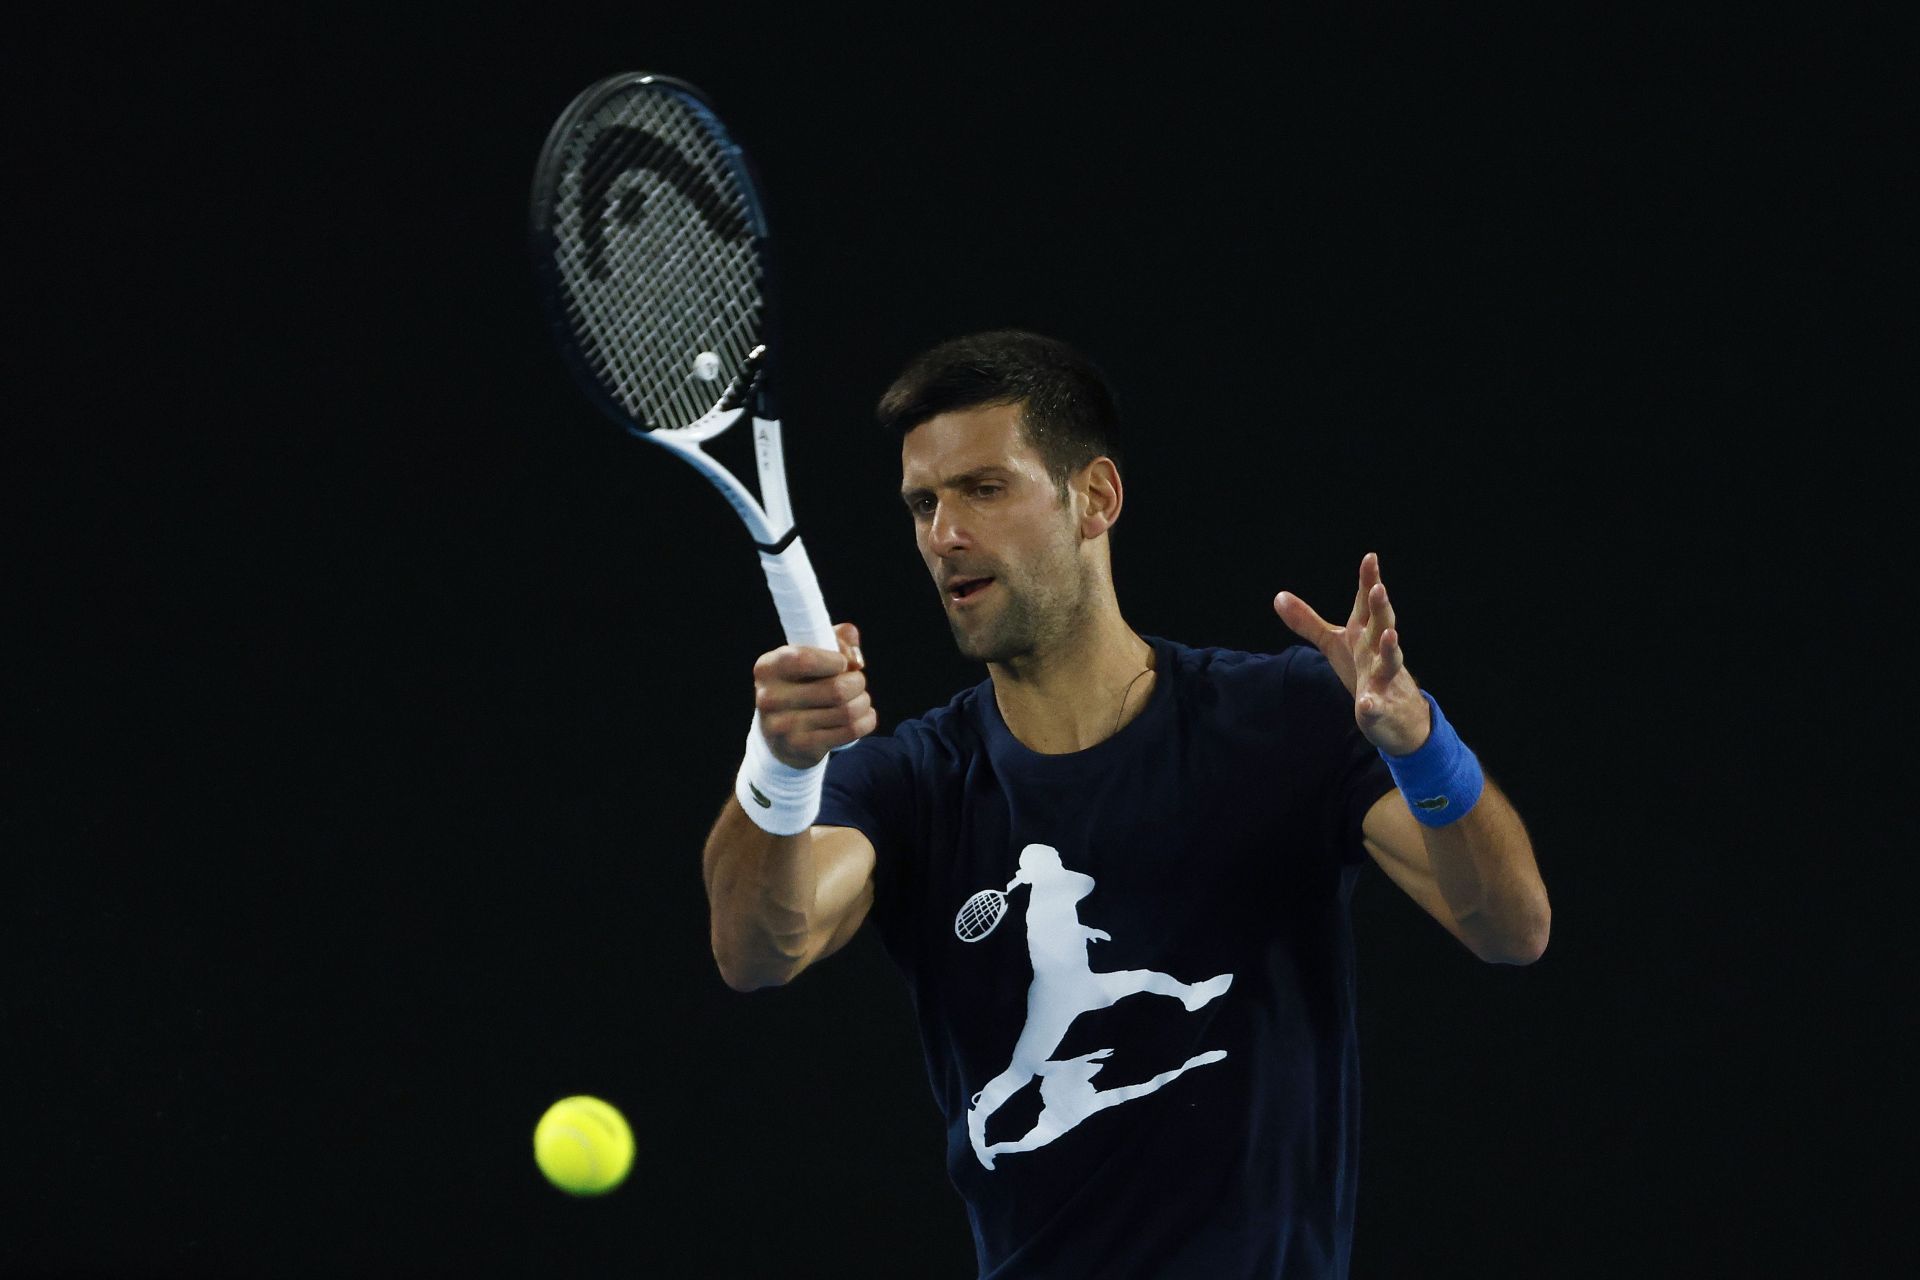 Djokovic was not allowed to participate in the 2022 Australian Open because he was unvaccinated